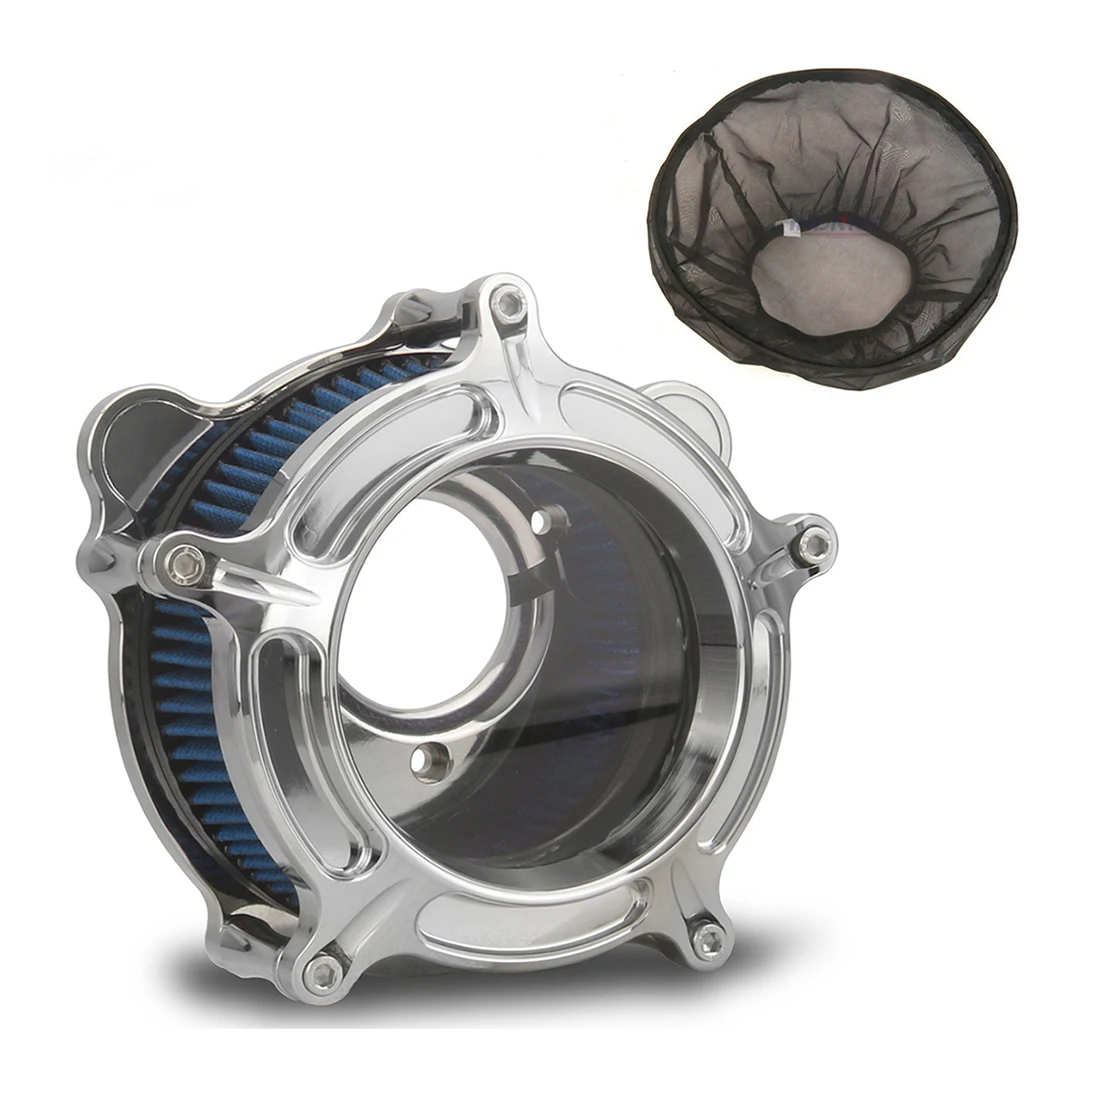 

Chromed Clarion Air cleaner filters for harley Softail Deuce FXSTD Dyna Low Rider FXDL 1993-2015